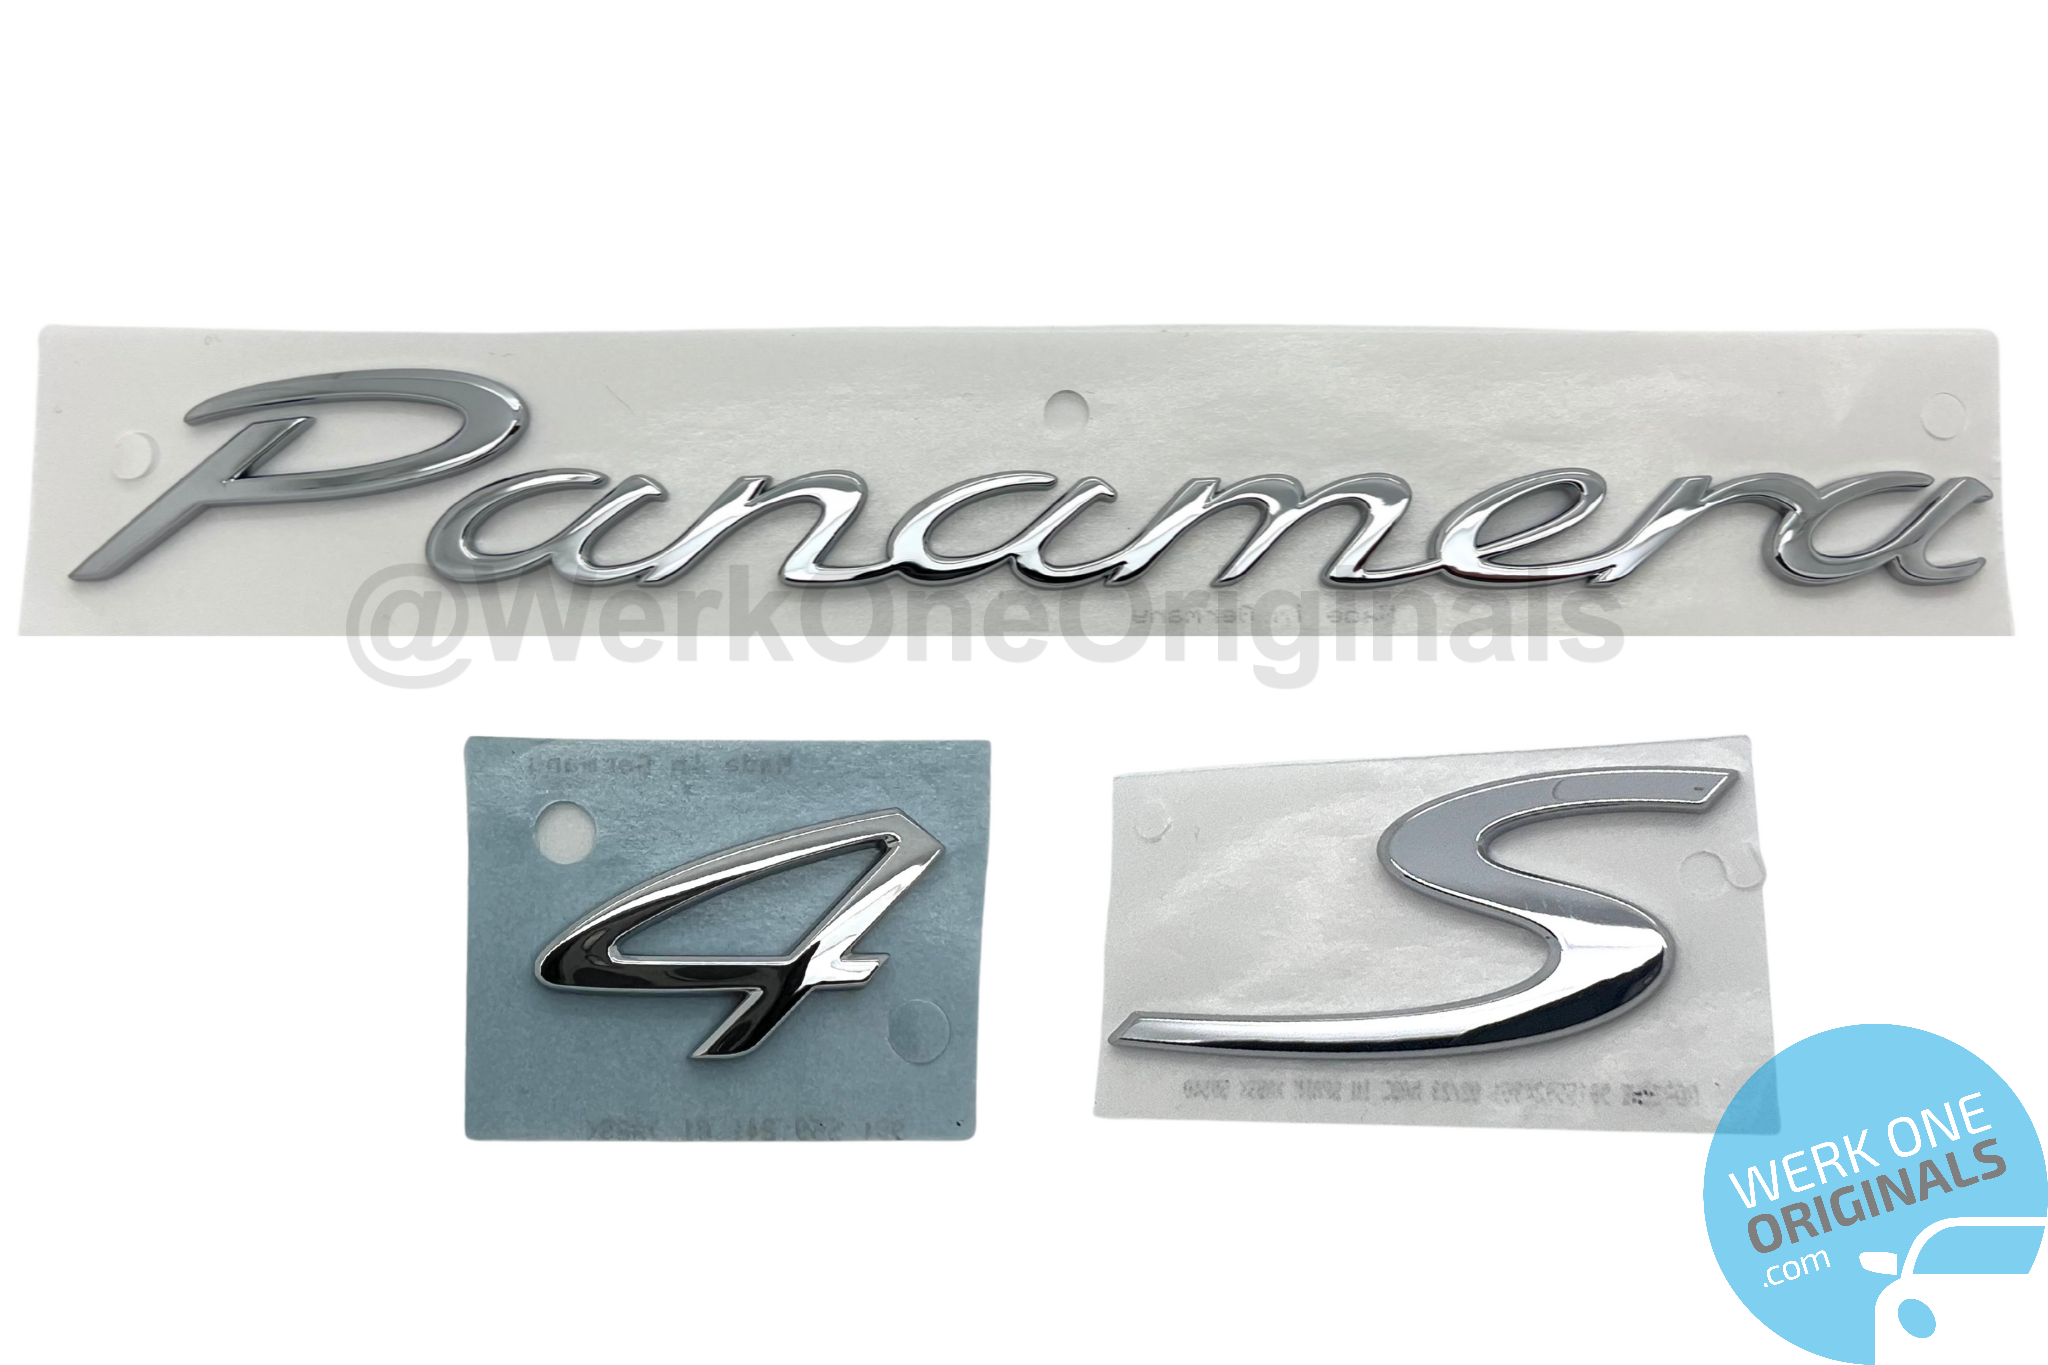 Porsche Official 'Panamera 4S' Rear Badge Decal in Chrome Silver for Panamera 4S Type 907 & 970 Models